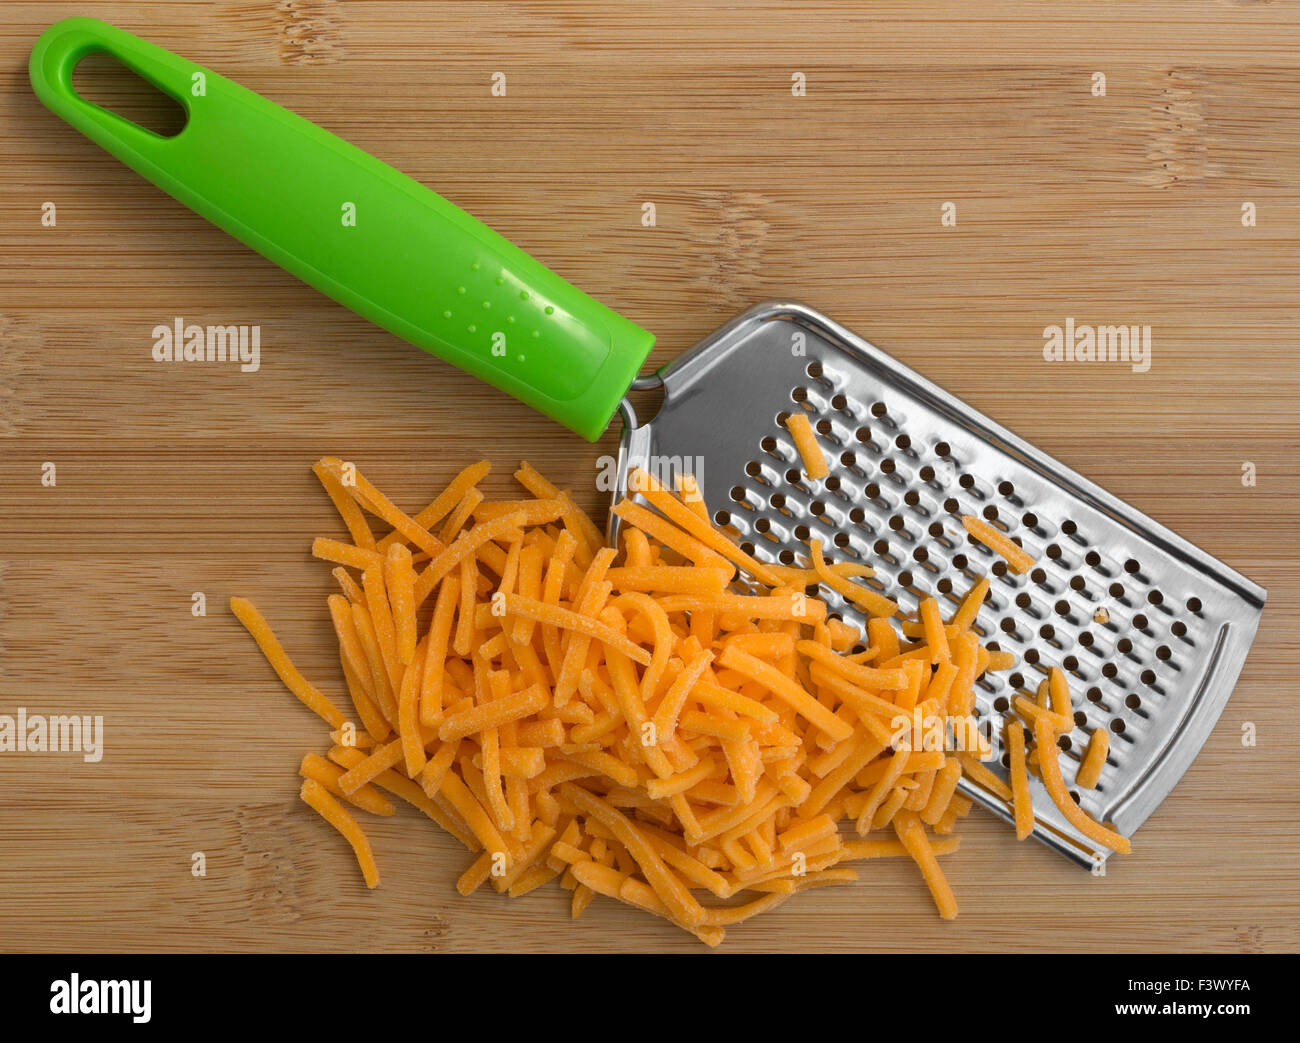 Top view of cheddar cheese that has been grated with a cheese grater atop a wood cutting board. Stock Photo